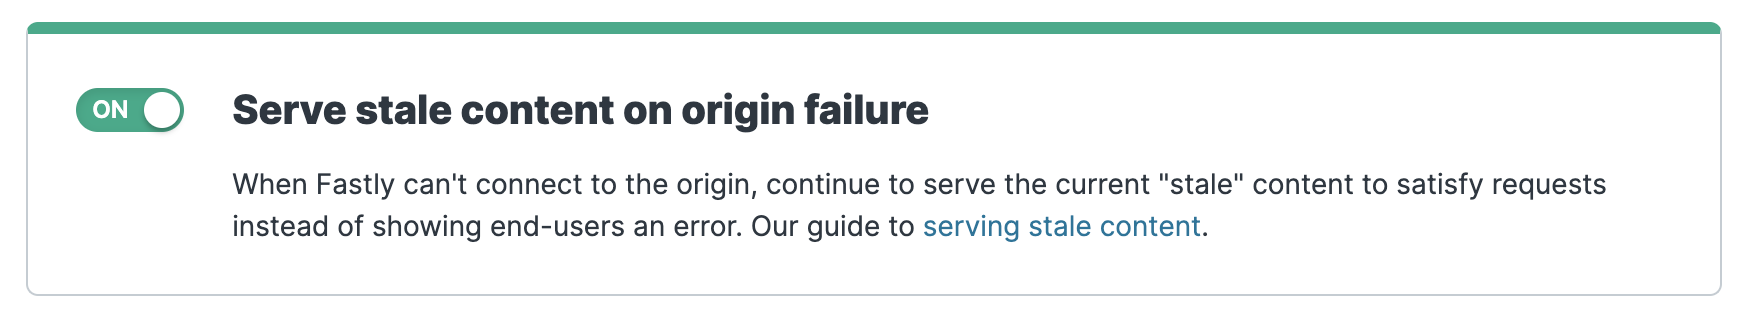 Enabling the serve stale content on origin failure in the Fastly web interface